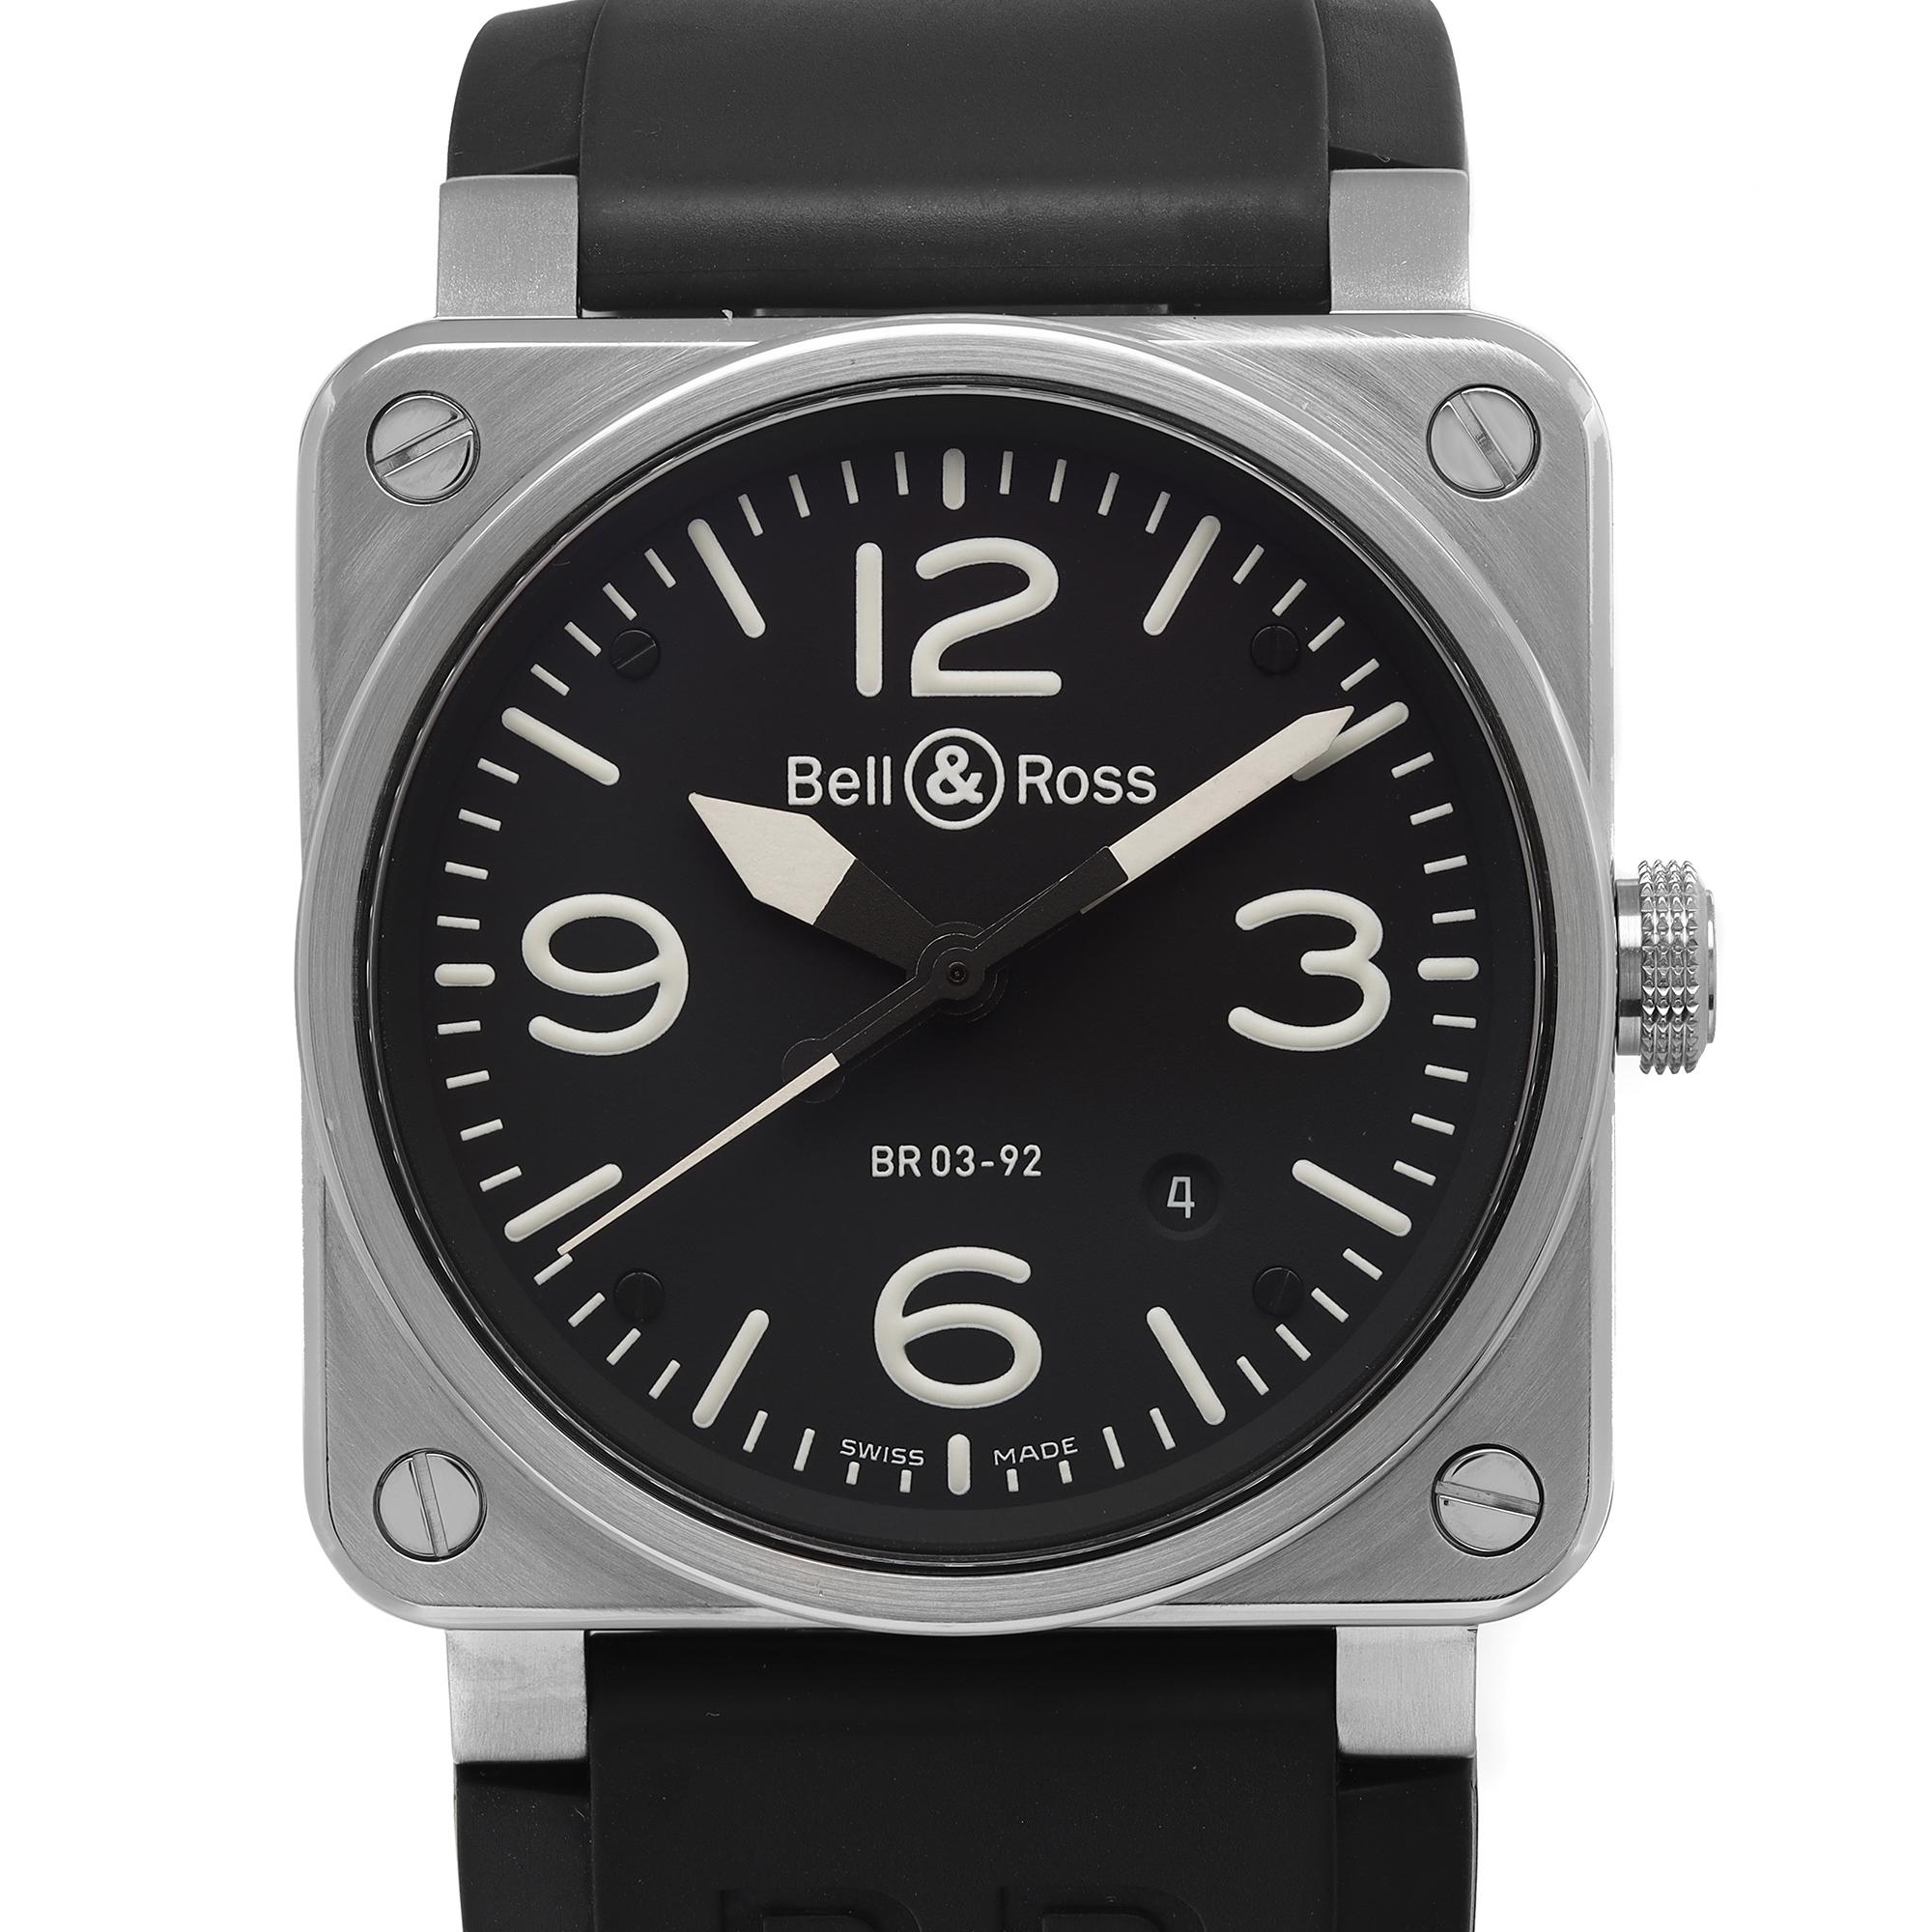 Pre-owned. Original box and papers are not included. Minor wear signs on bands 

Brand: Bell & Ross  Type: Wristwatch  Department: Men  Model Number: BR 03-92  Country/Region of Manufacture: Switzerland  Style: Military  Model: Bell & Ross BR 03-92 